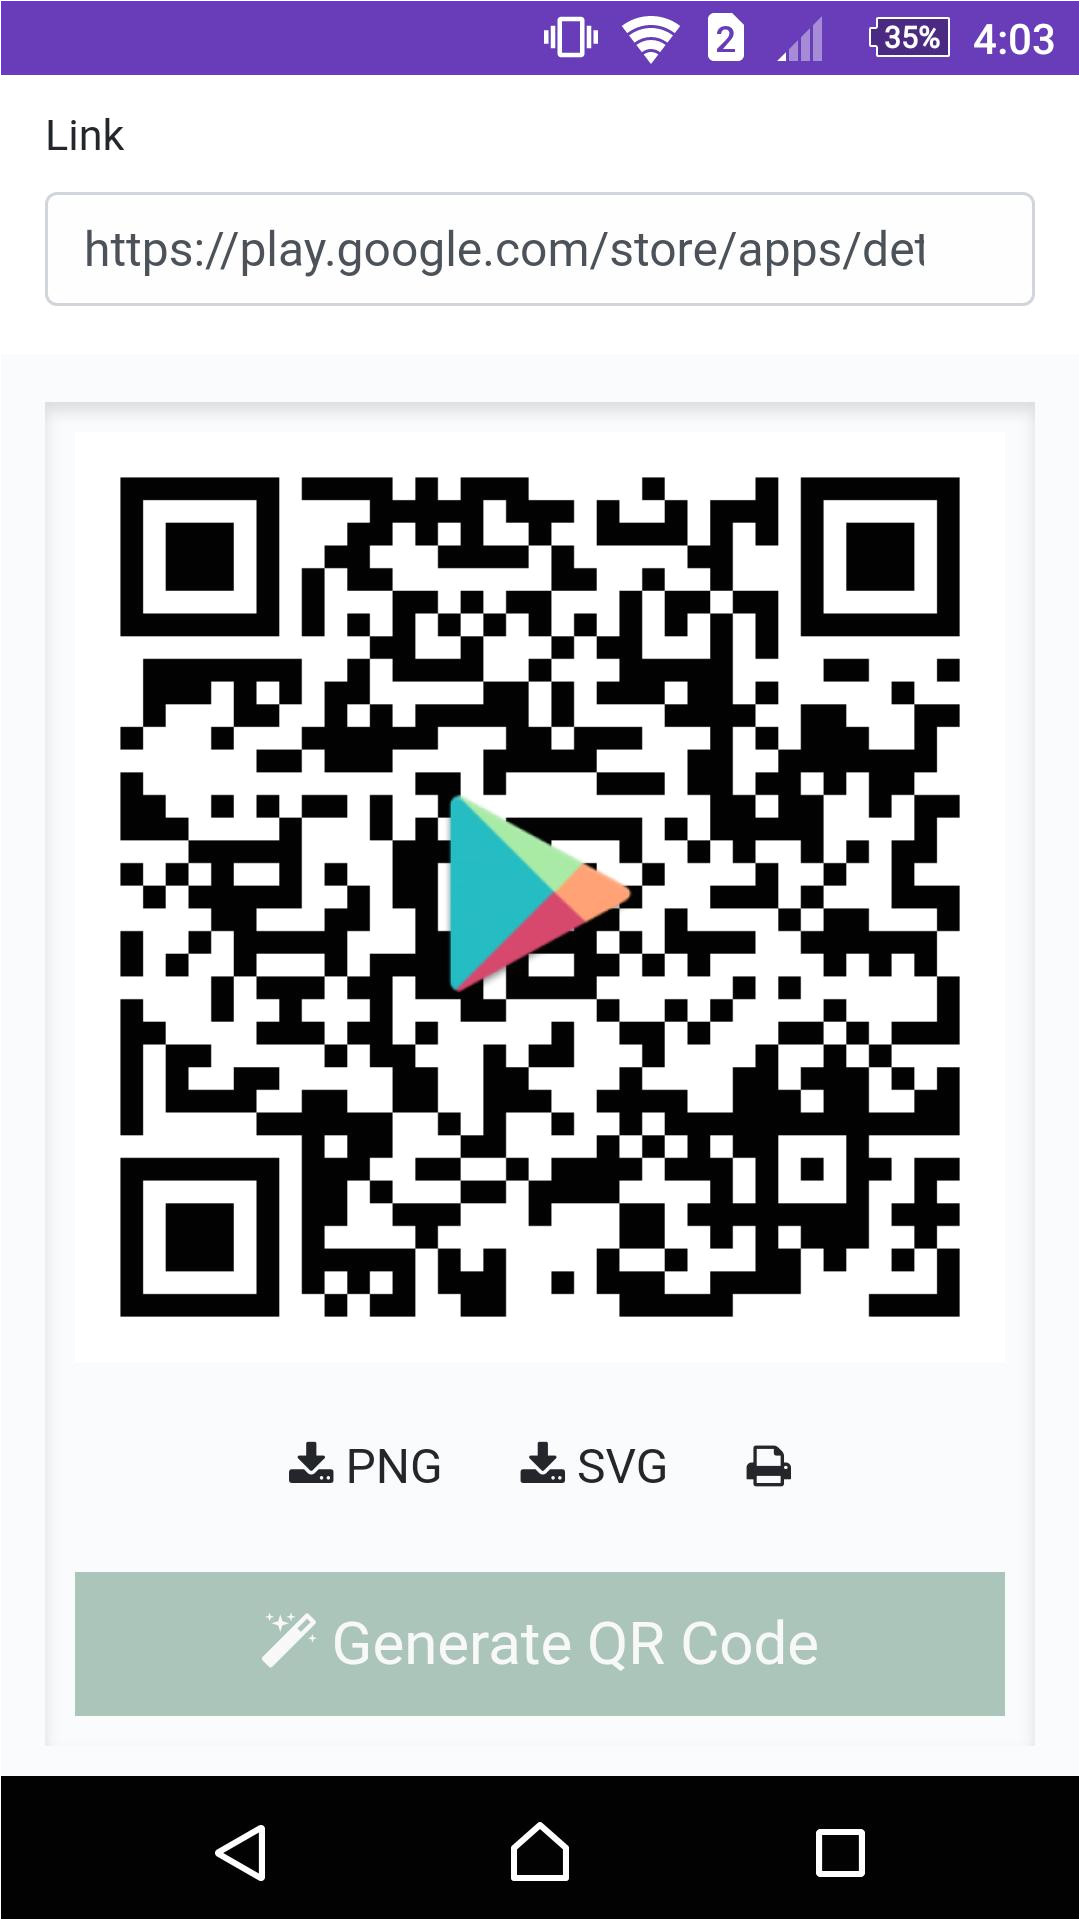 Name Card Qr Code Generator Advanced Qr Code Generator for android Apk Download